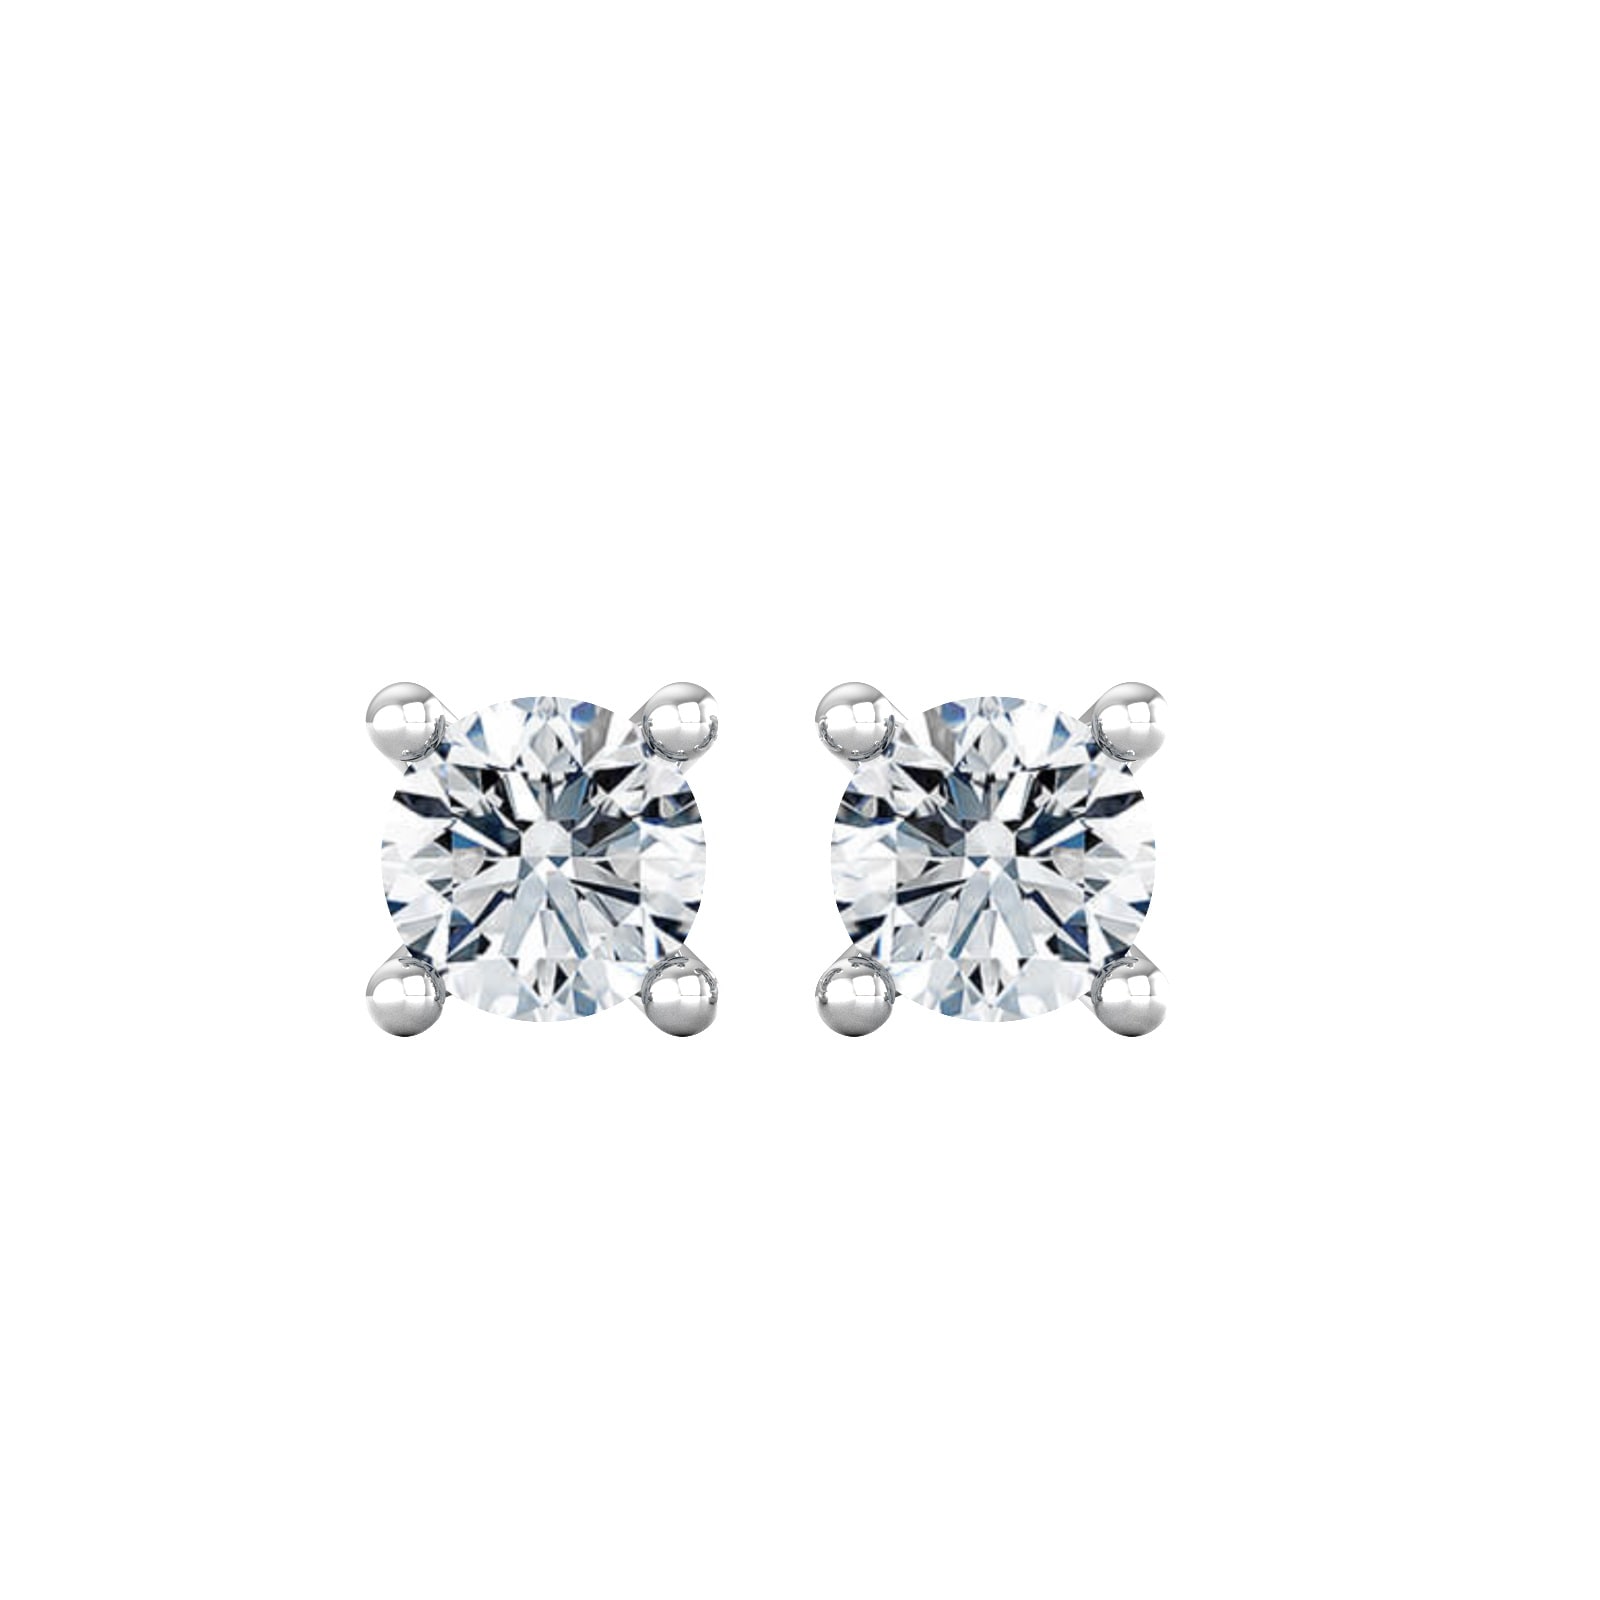 18ct White Gold 0.60ct 4 Claw Diamond Stud Earrings